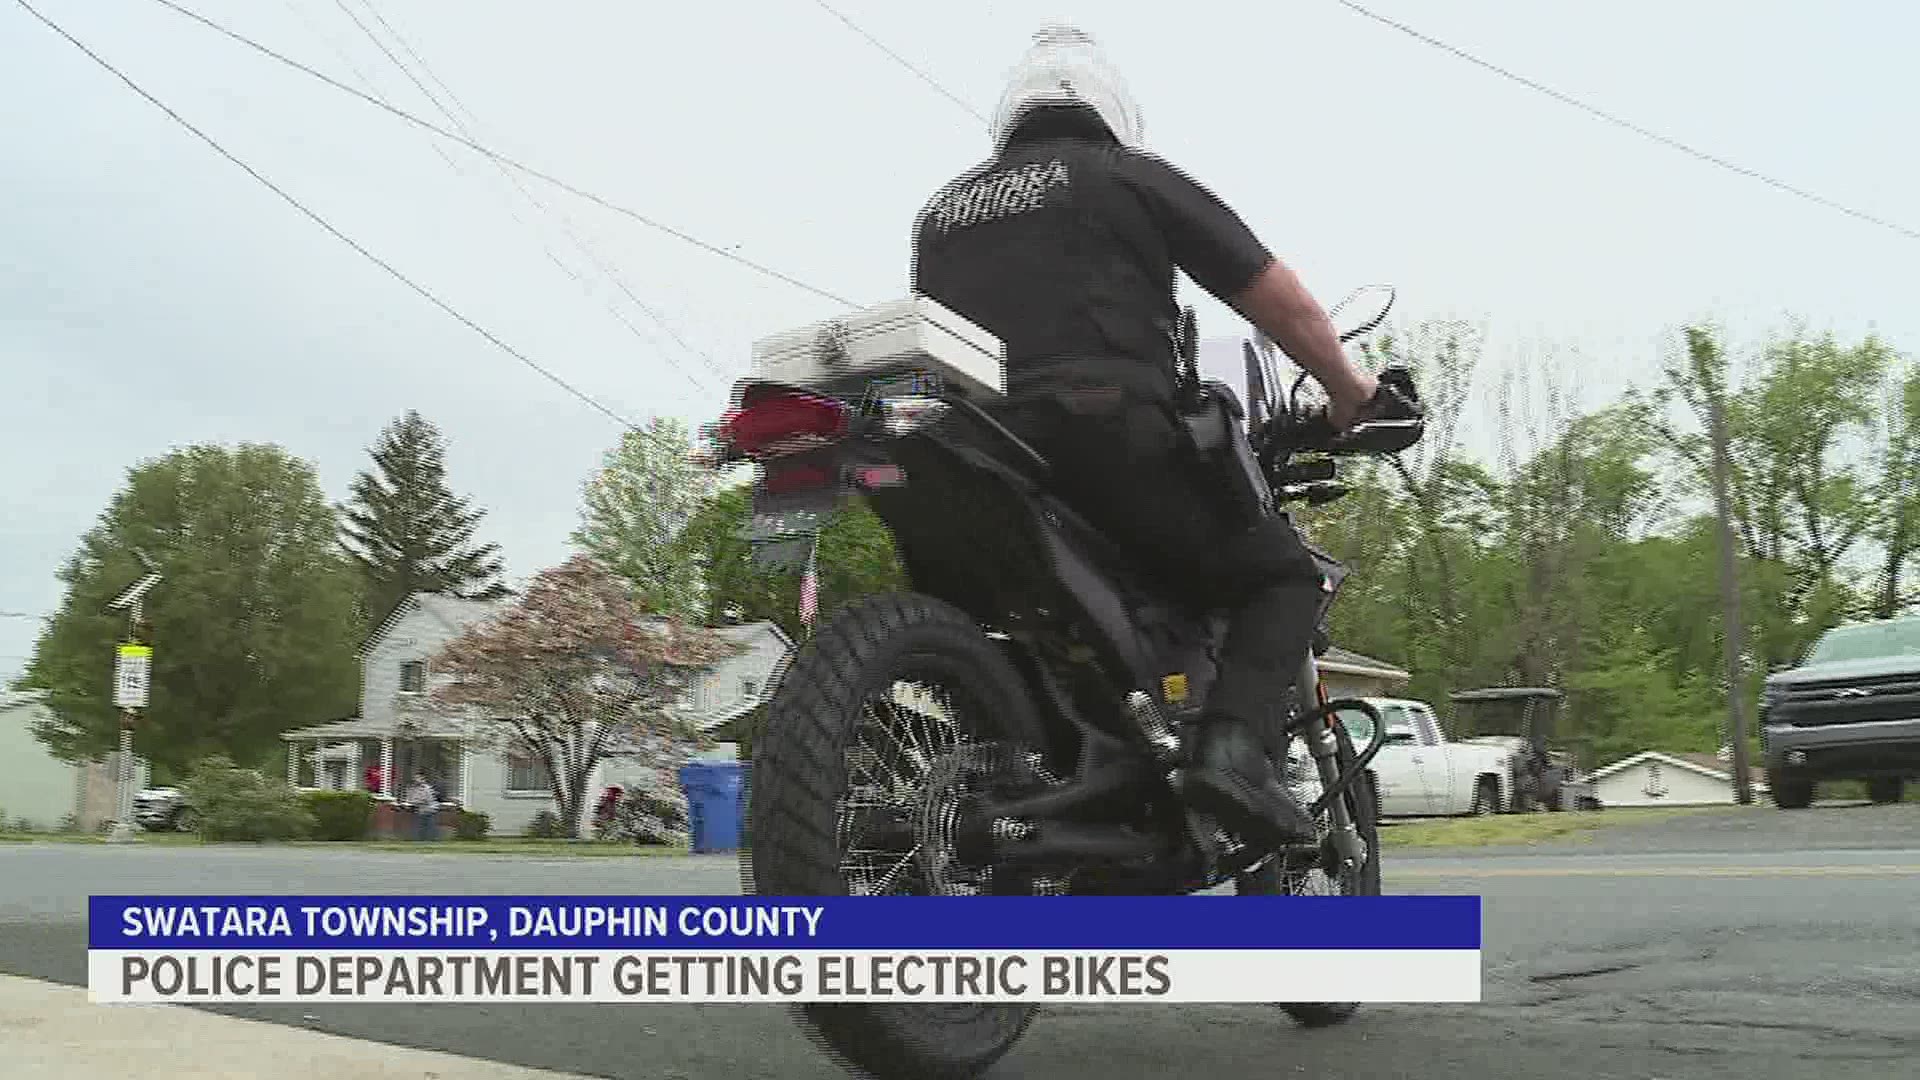 The Swatara Township Police Department is getting a brand new fleet of eco-friendly motorcycles.